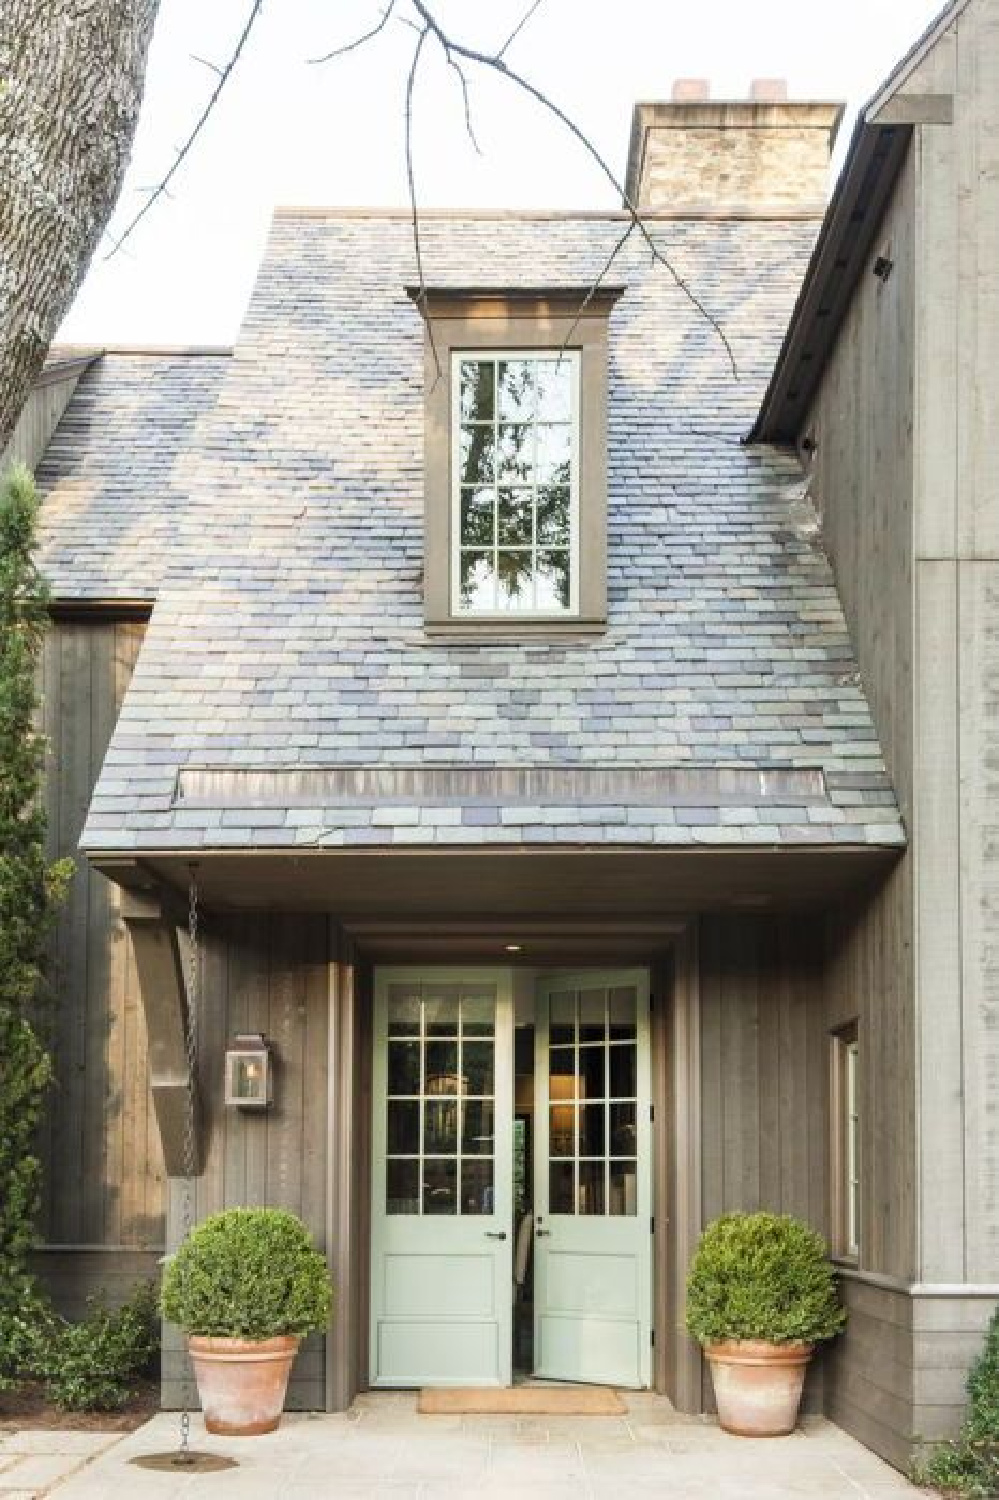 Bevolo Williamsburg lantern fixture on a beautiful home with steep roof and dormer. #housefacades